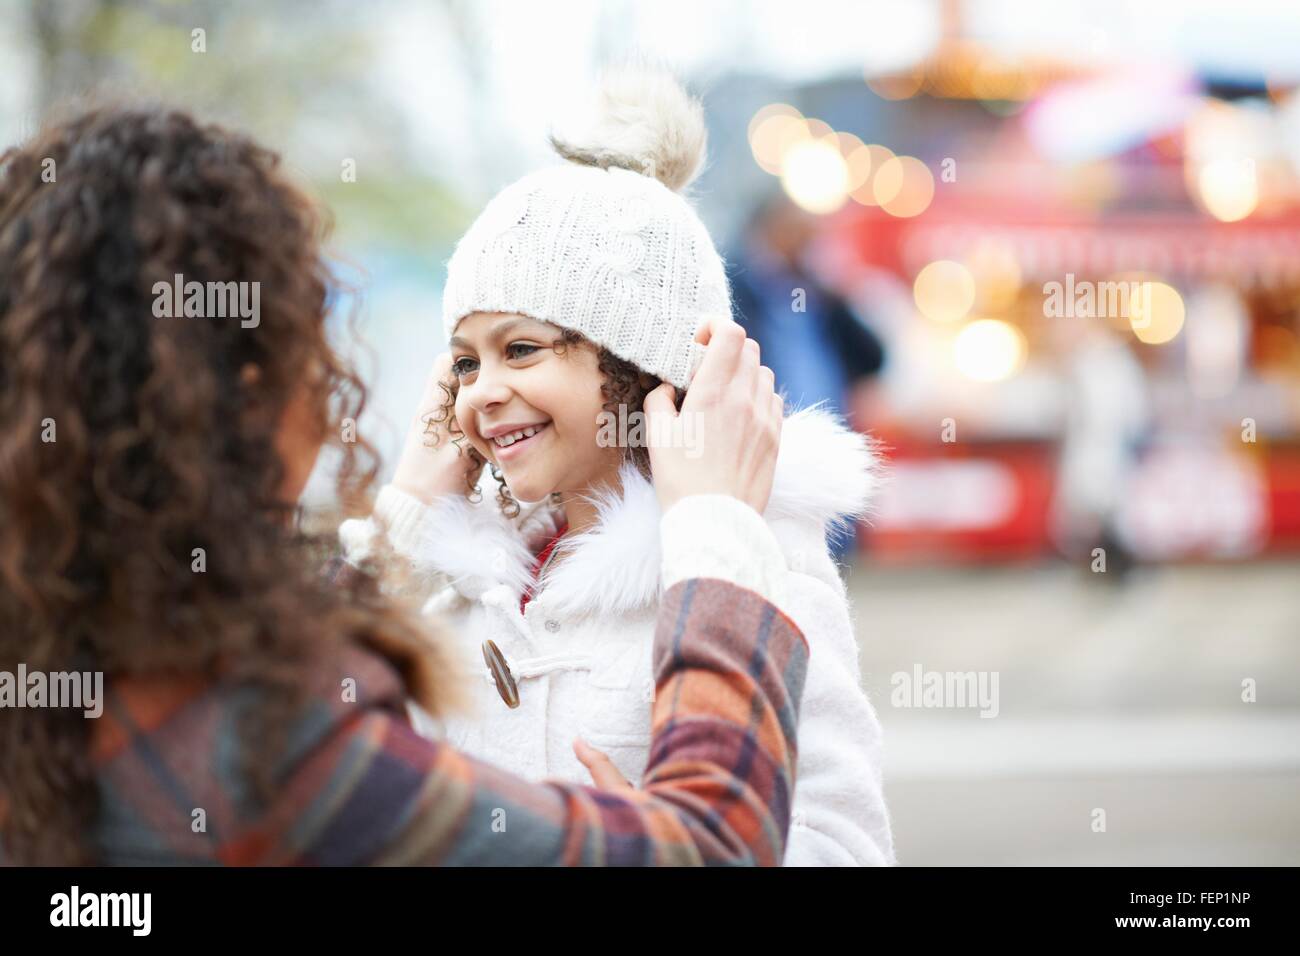 Mother putting knit hat on smiling daughter Stock Photo